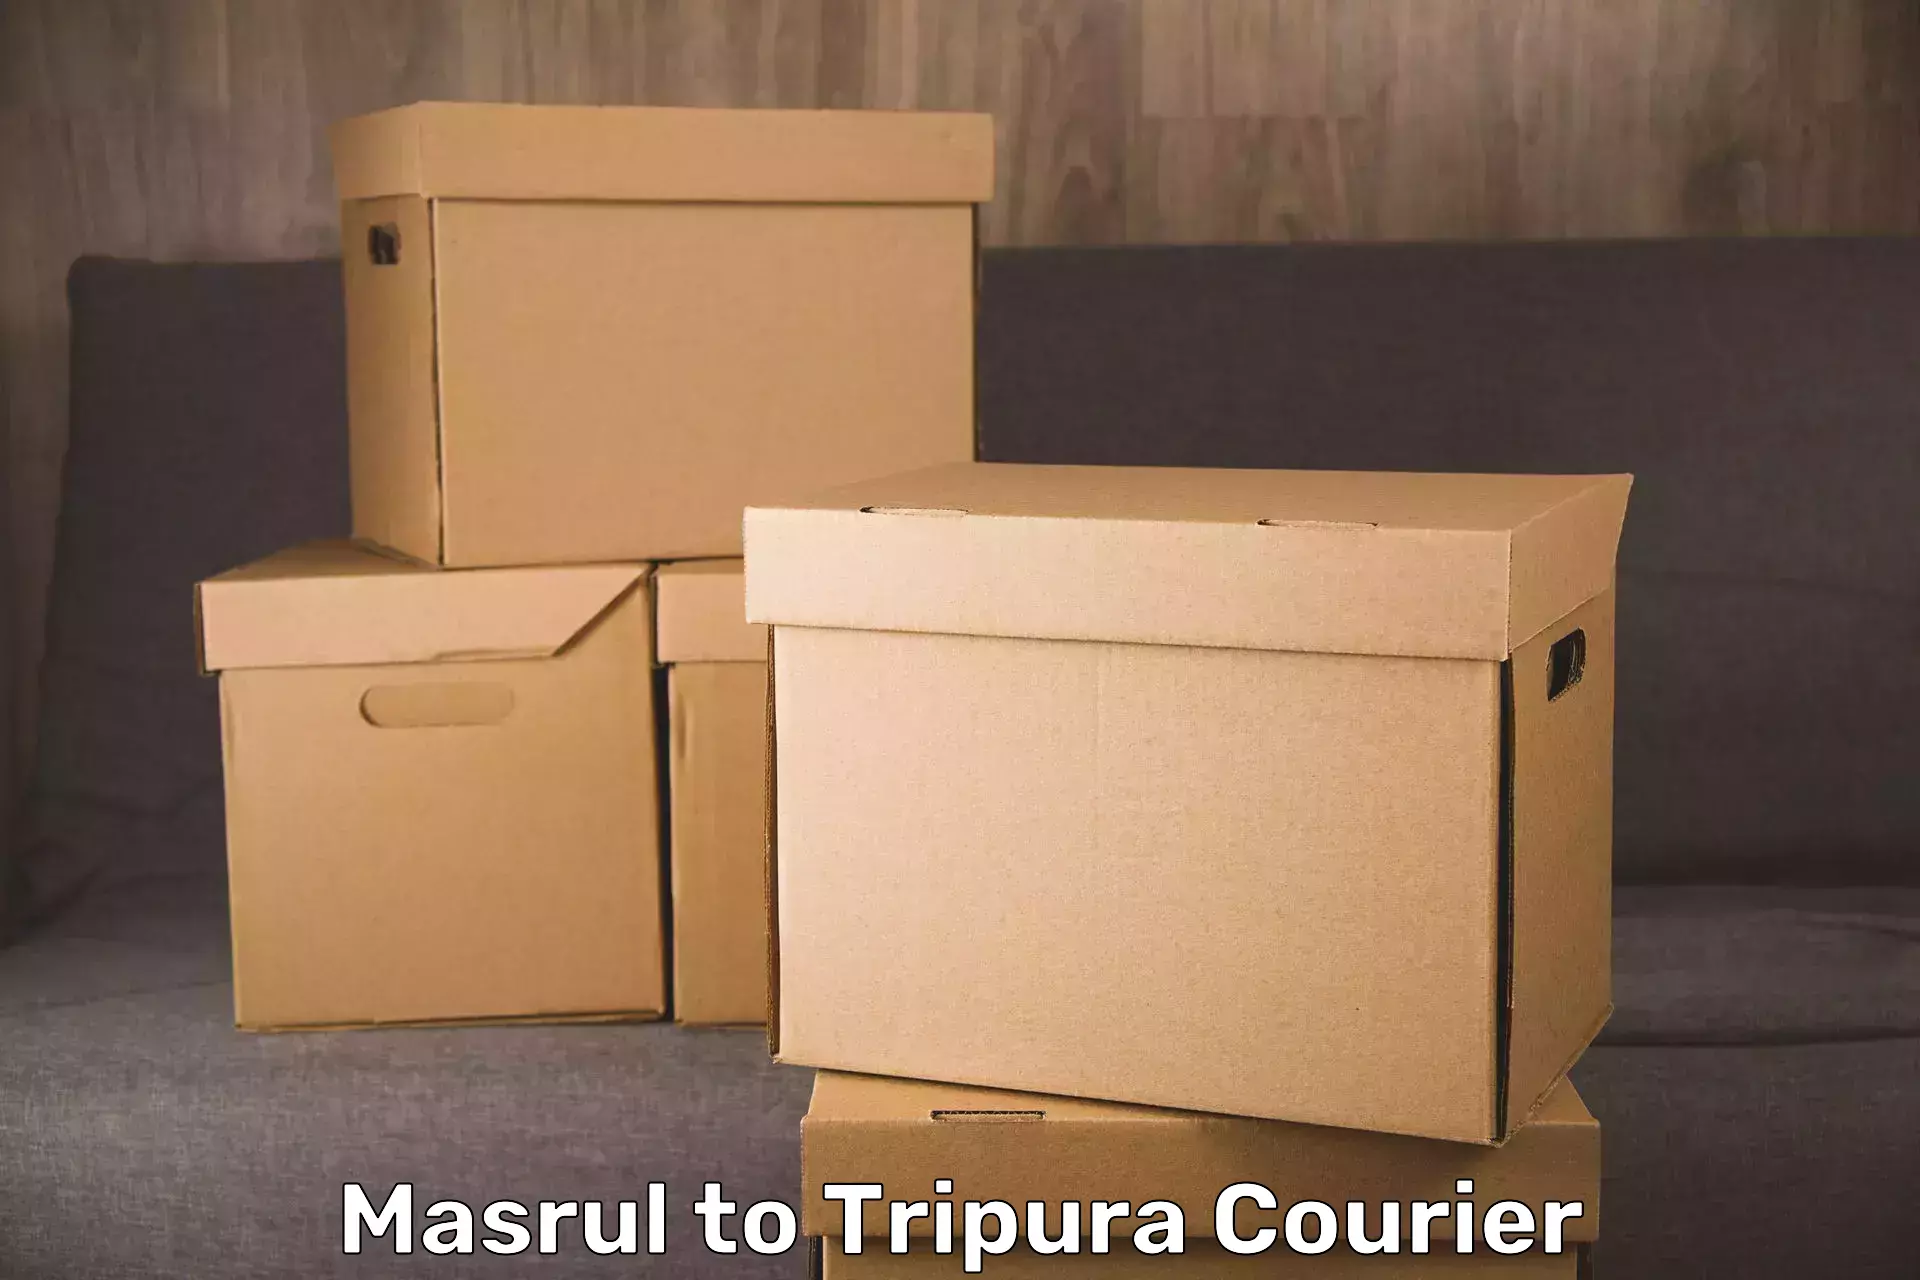 Instant baggage transport quote Masrul to Udaipur Tripura